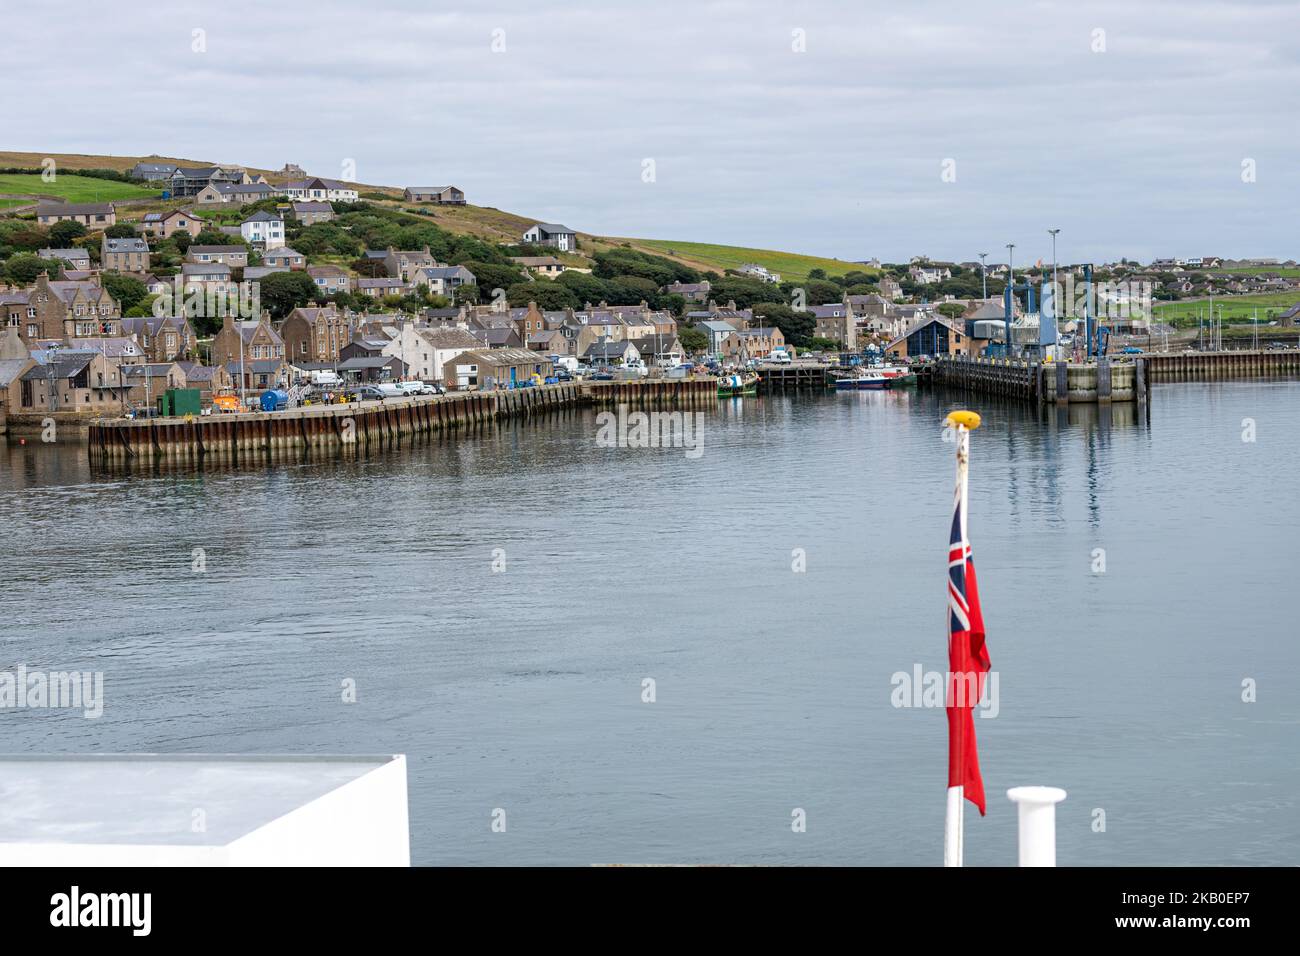 View of Stromness from the NorthLink Ferries and Red Ensign Flag (the UK Merchant Navy’s official flag), Orkney, Scotland, UK Stock Photo